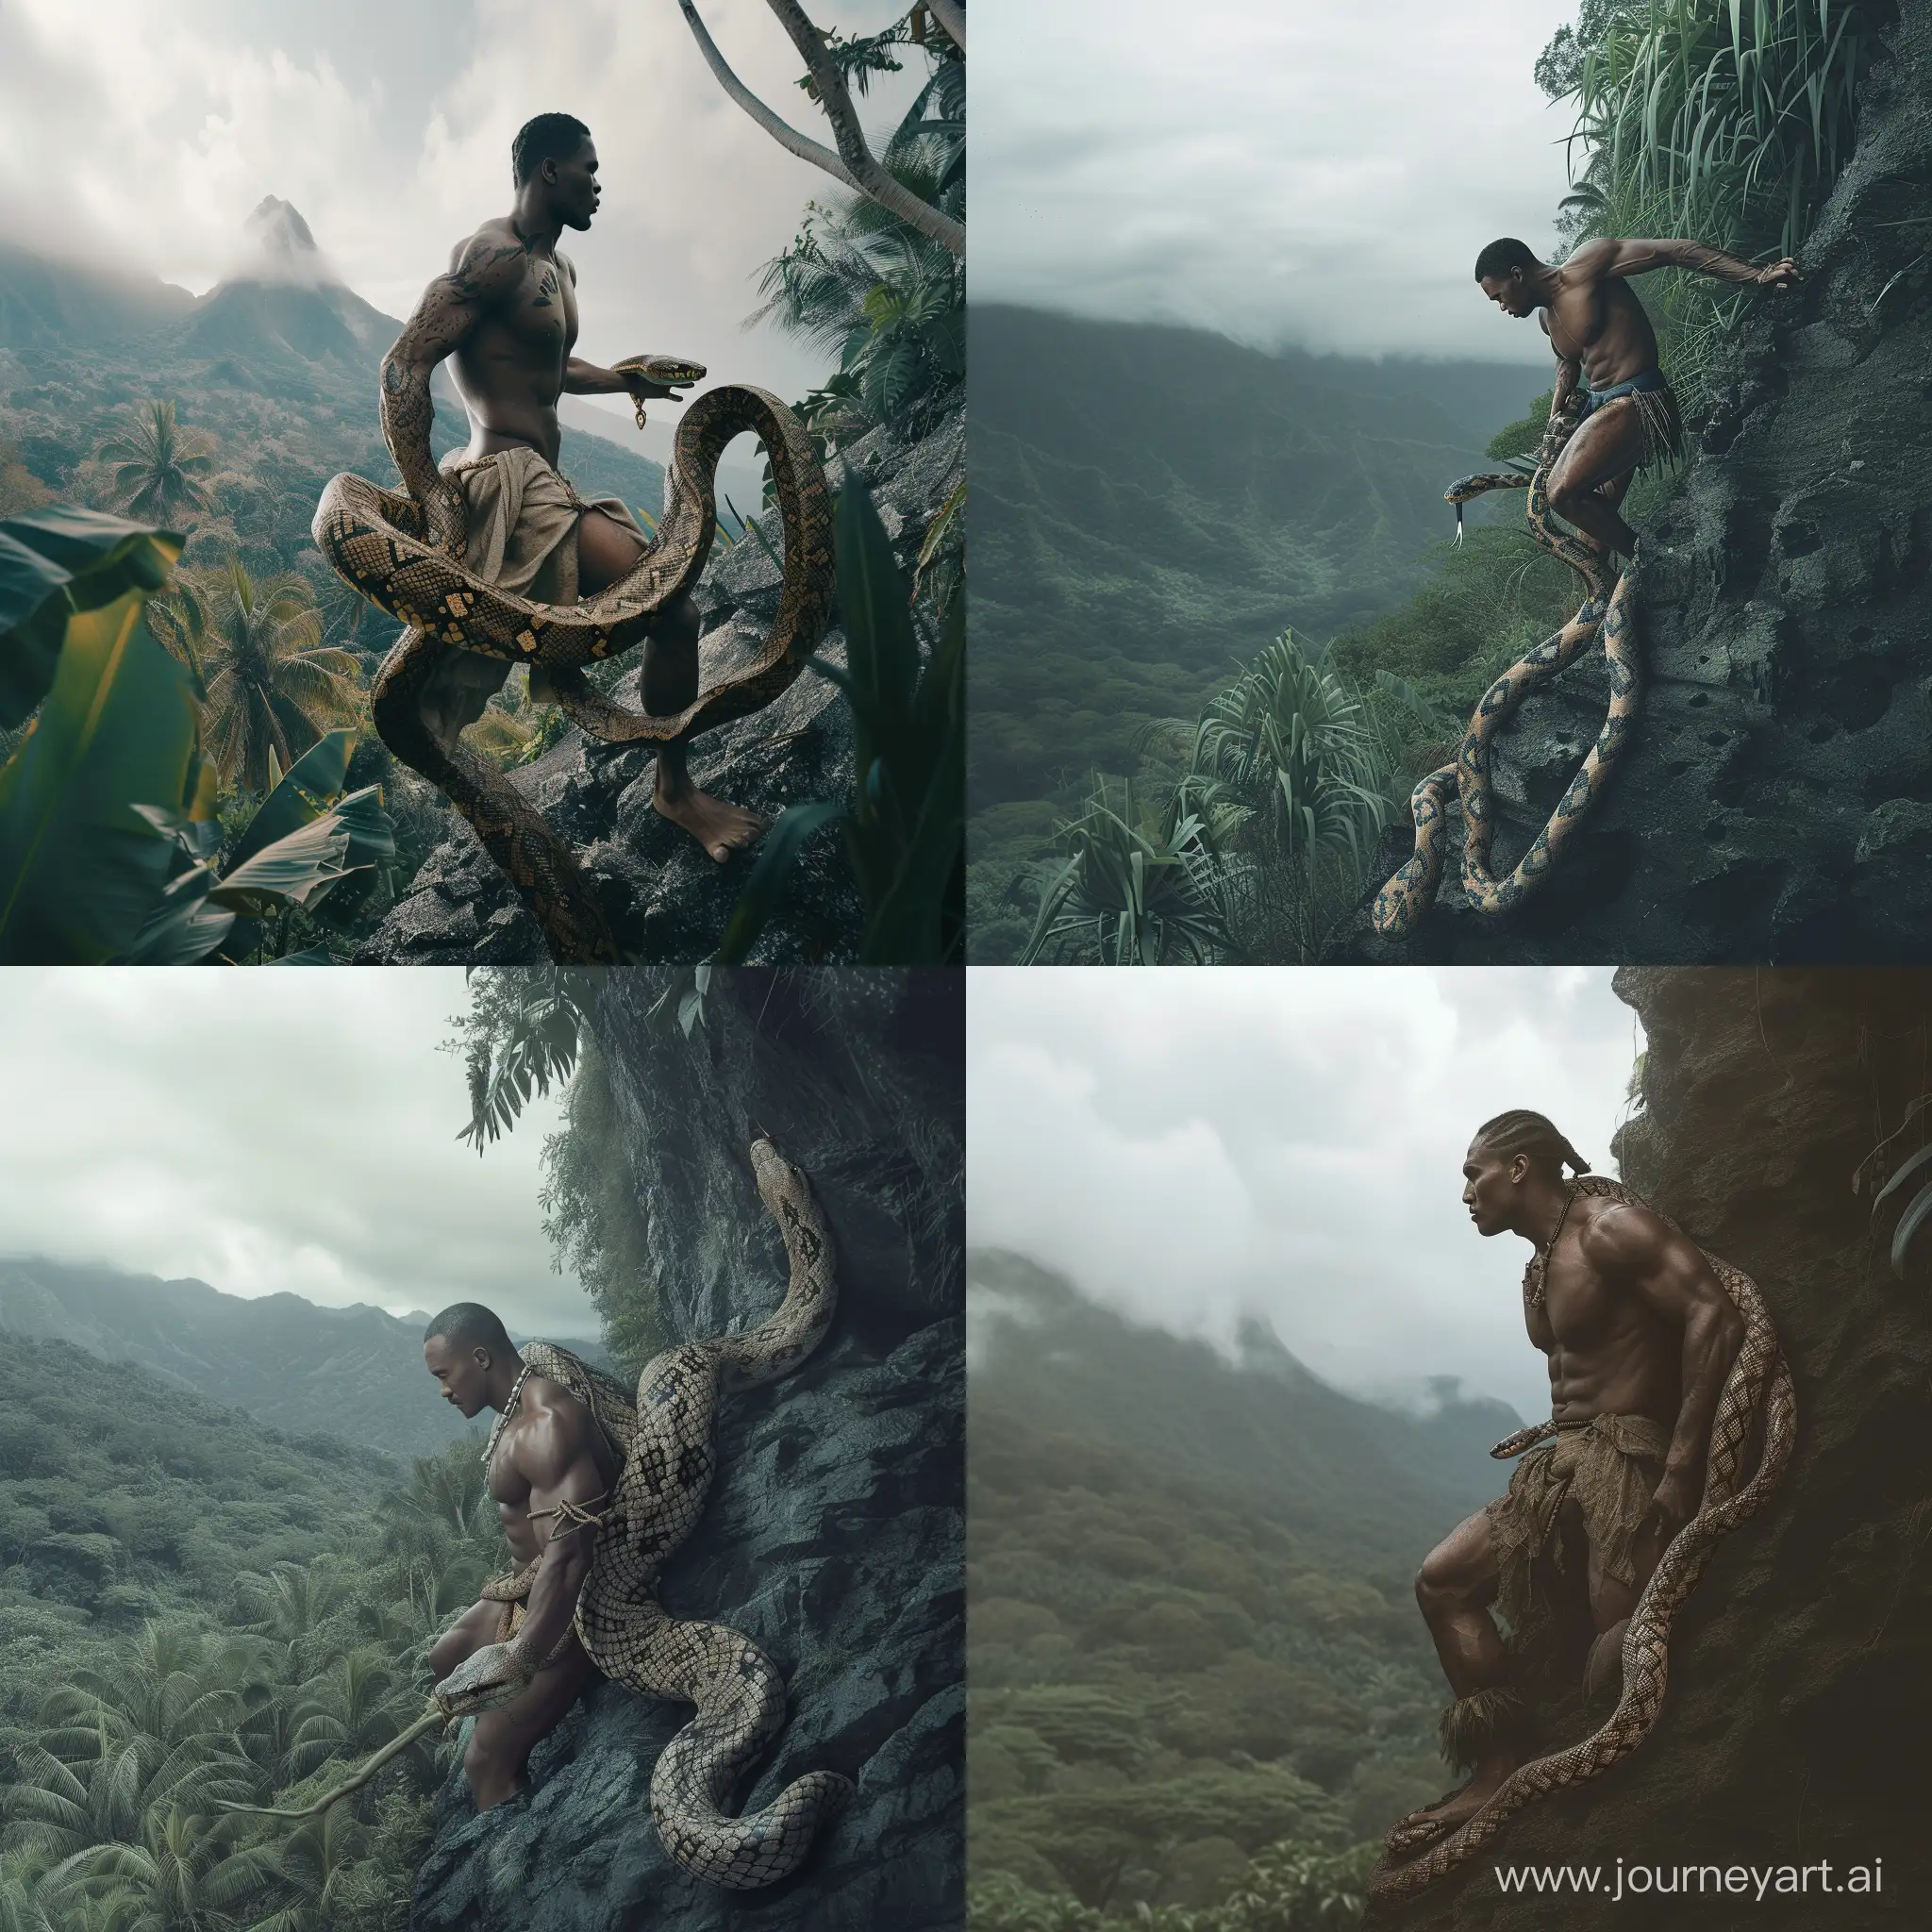 Fijian man is half giant snake from waist down, 
slithering out of a mountain top, photorealistic,
cinematic, scary, jungle, spooky, wide shot, full
body